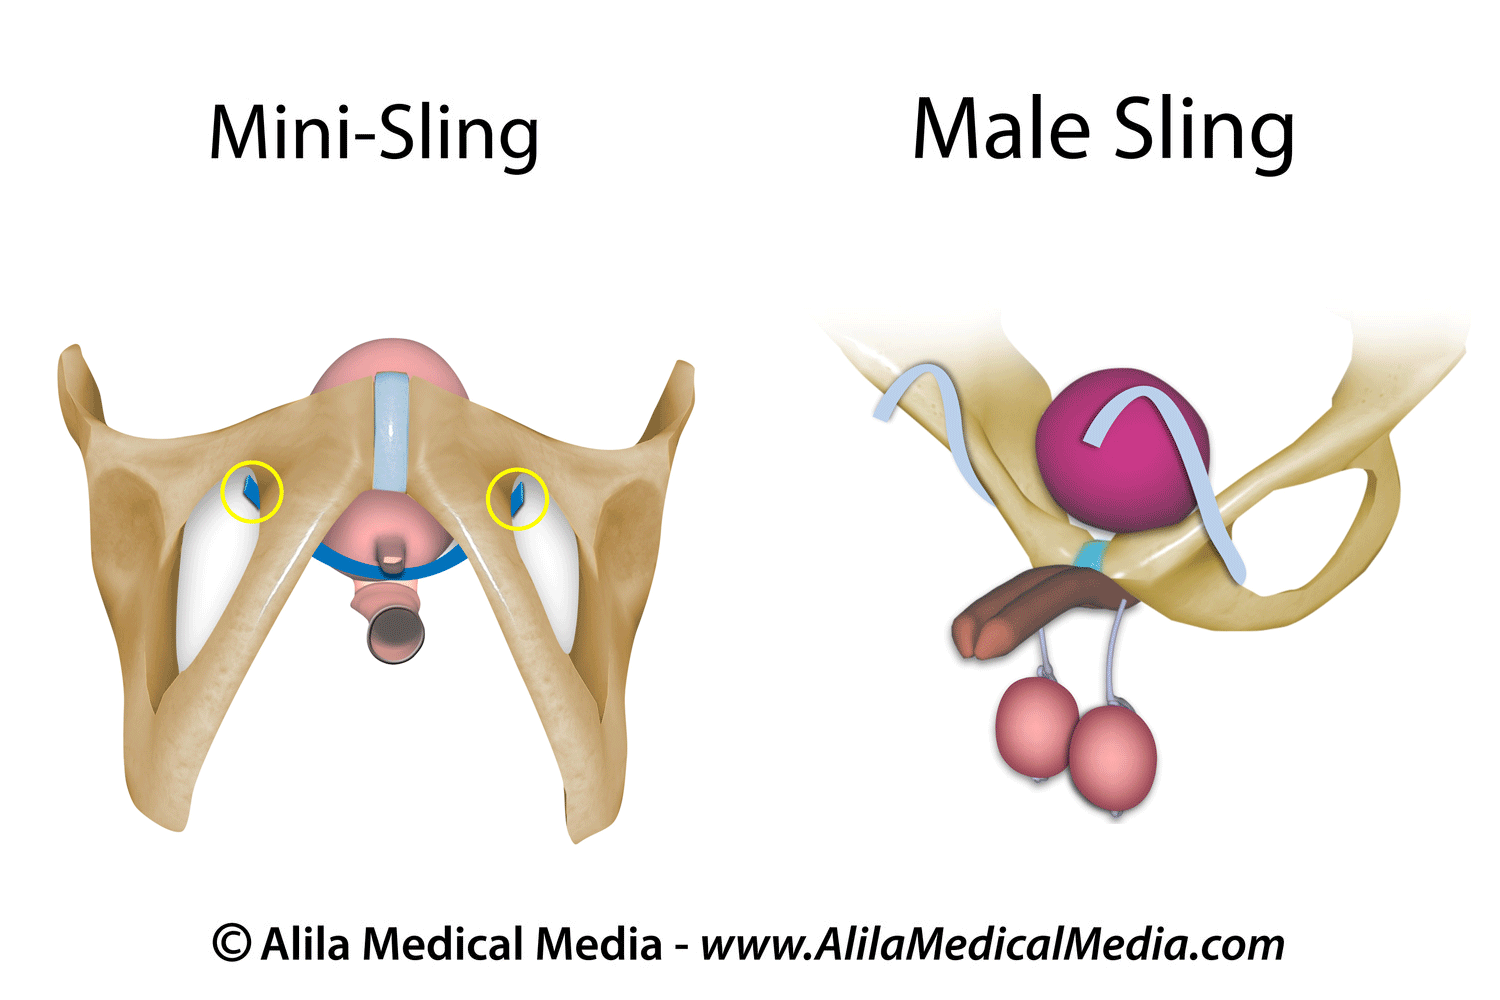 Mini sling and mail sling to treat bladder incontinence.